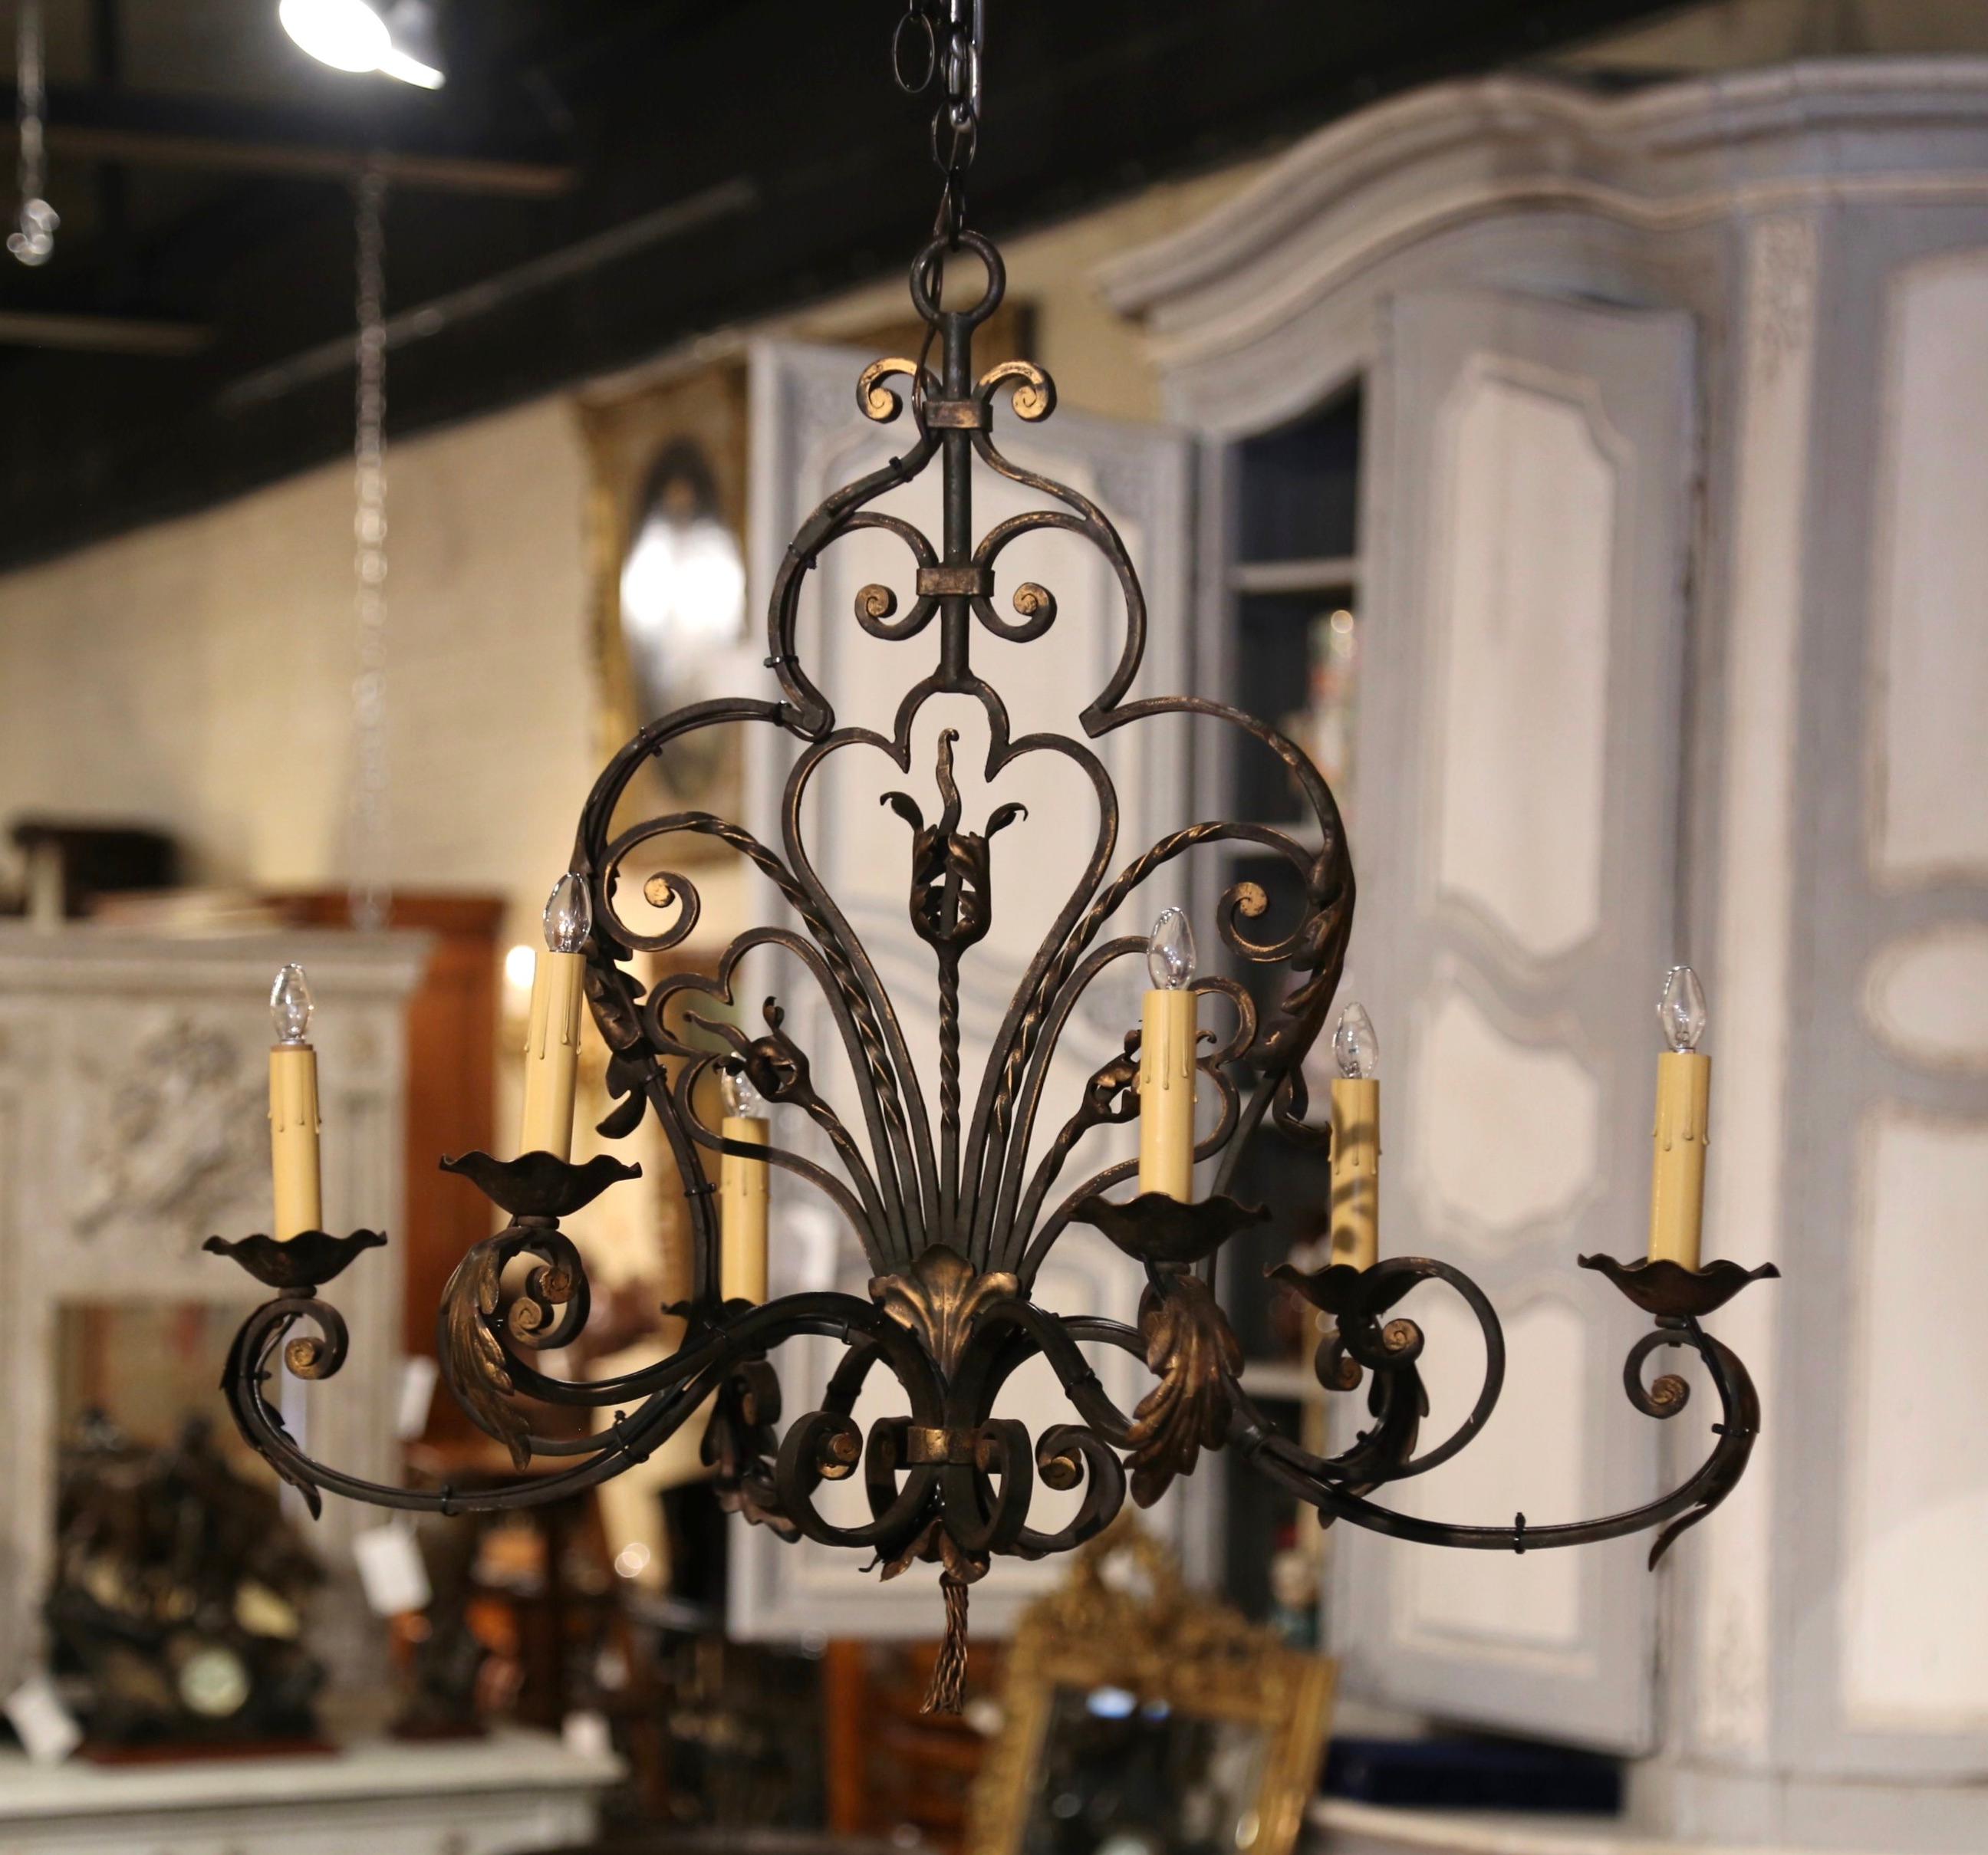 This elegant chandelier would make a lovely addition to a breakfast or dining room. Crafted in France circa 1920, and built of iron, the chandelier is oblong in shape. The fixture is decorated with metal flowers, acanthus leaves and scroll and